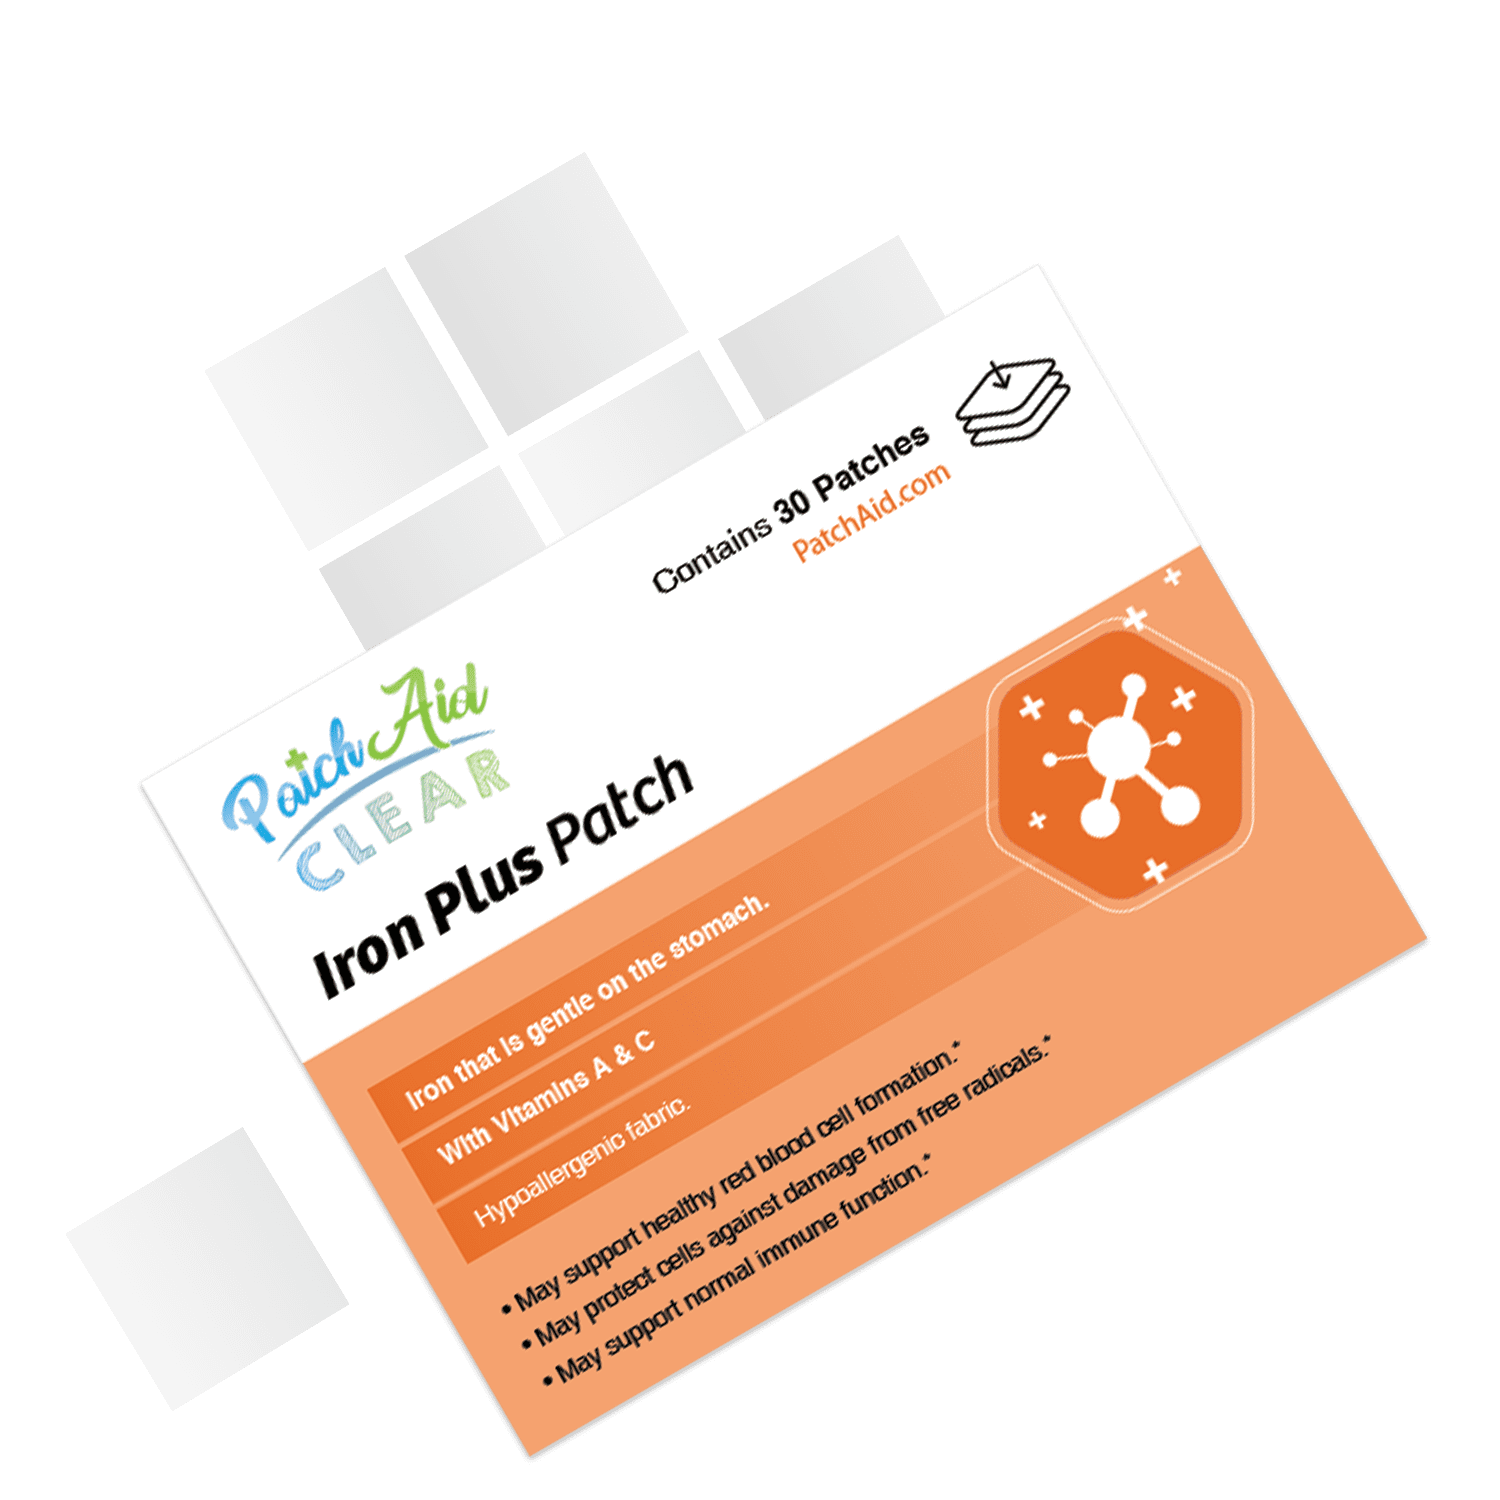 Iron Plus Vitamin Patch by PatchAid Color: Clear, Size: 1-Month Supply 